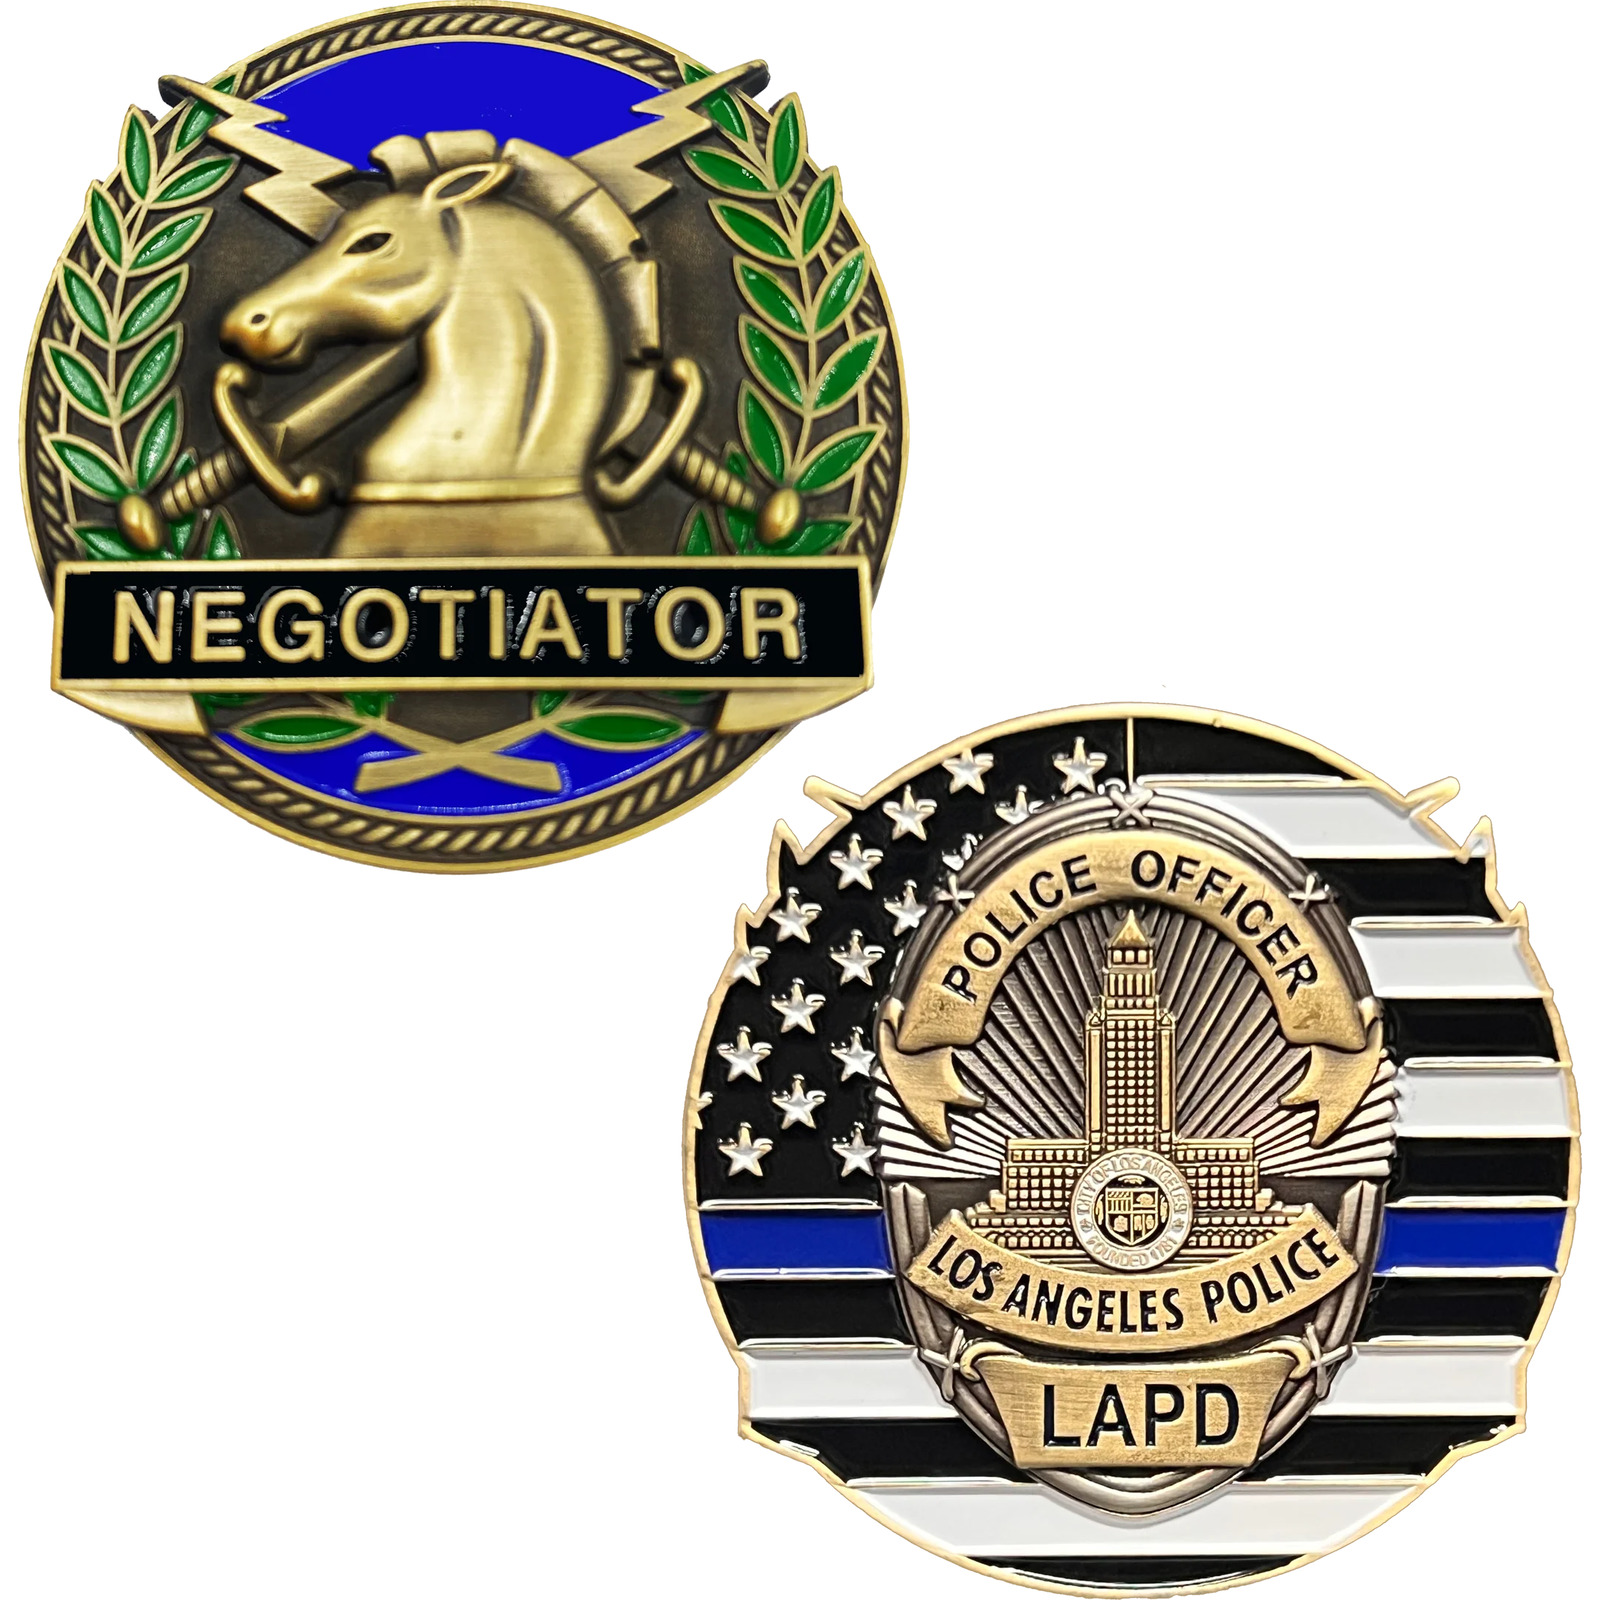 GL13-002 Los Angeles Police Department LAPD Thin Blue Line Negotiator Challenge